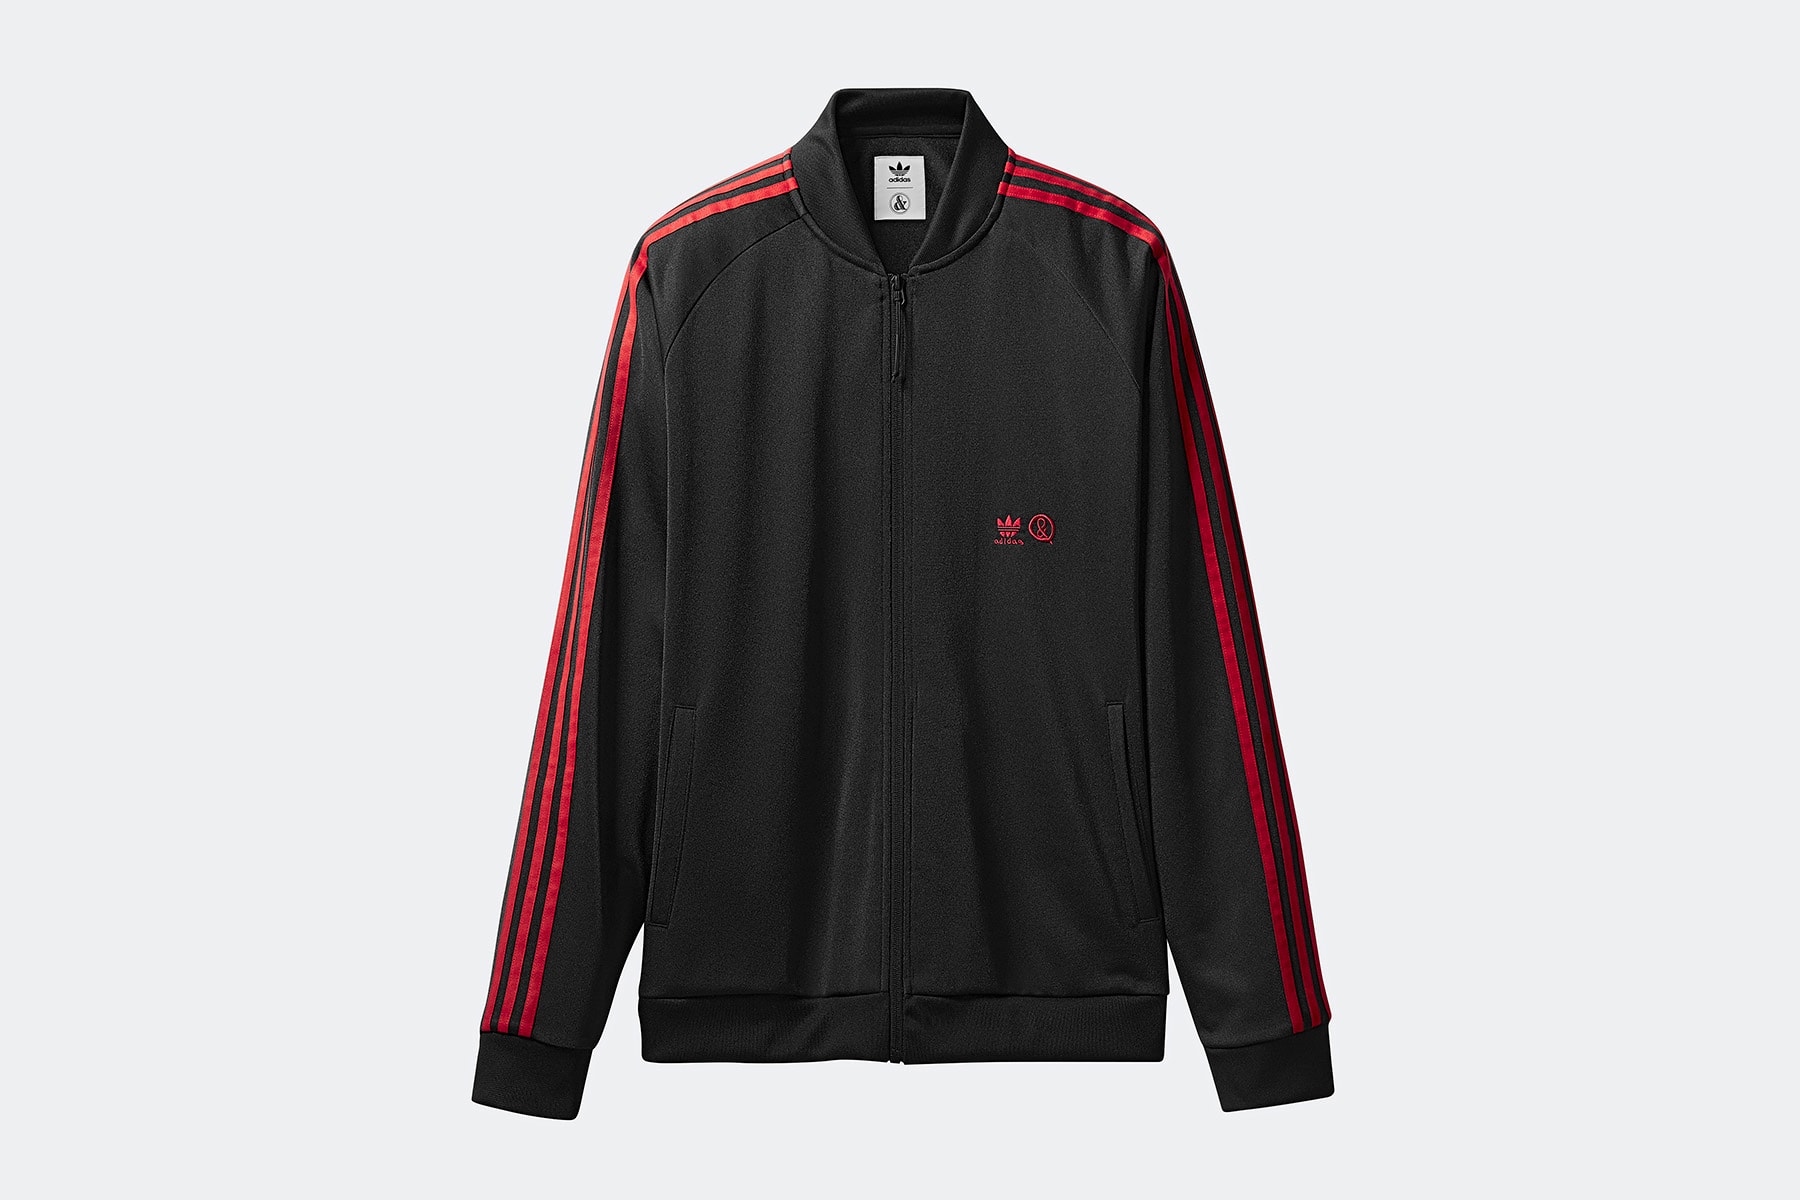 adidas Originals united arrows sons collaboration collection fall winter 2018 sneakers shoes outerwear layering pieces drop release date info poggy hip hop grafitti wanto b boy Rivalry Lo ultra star august 25 purchase buy sale sell